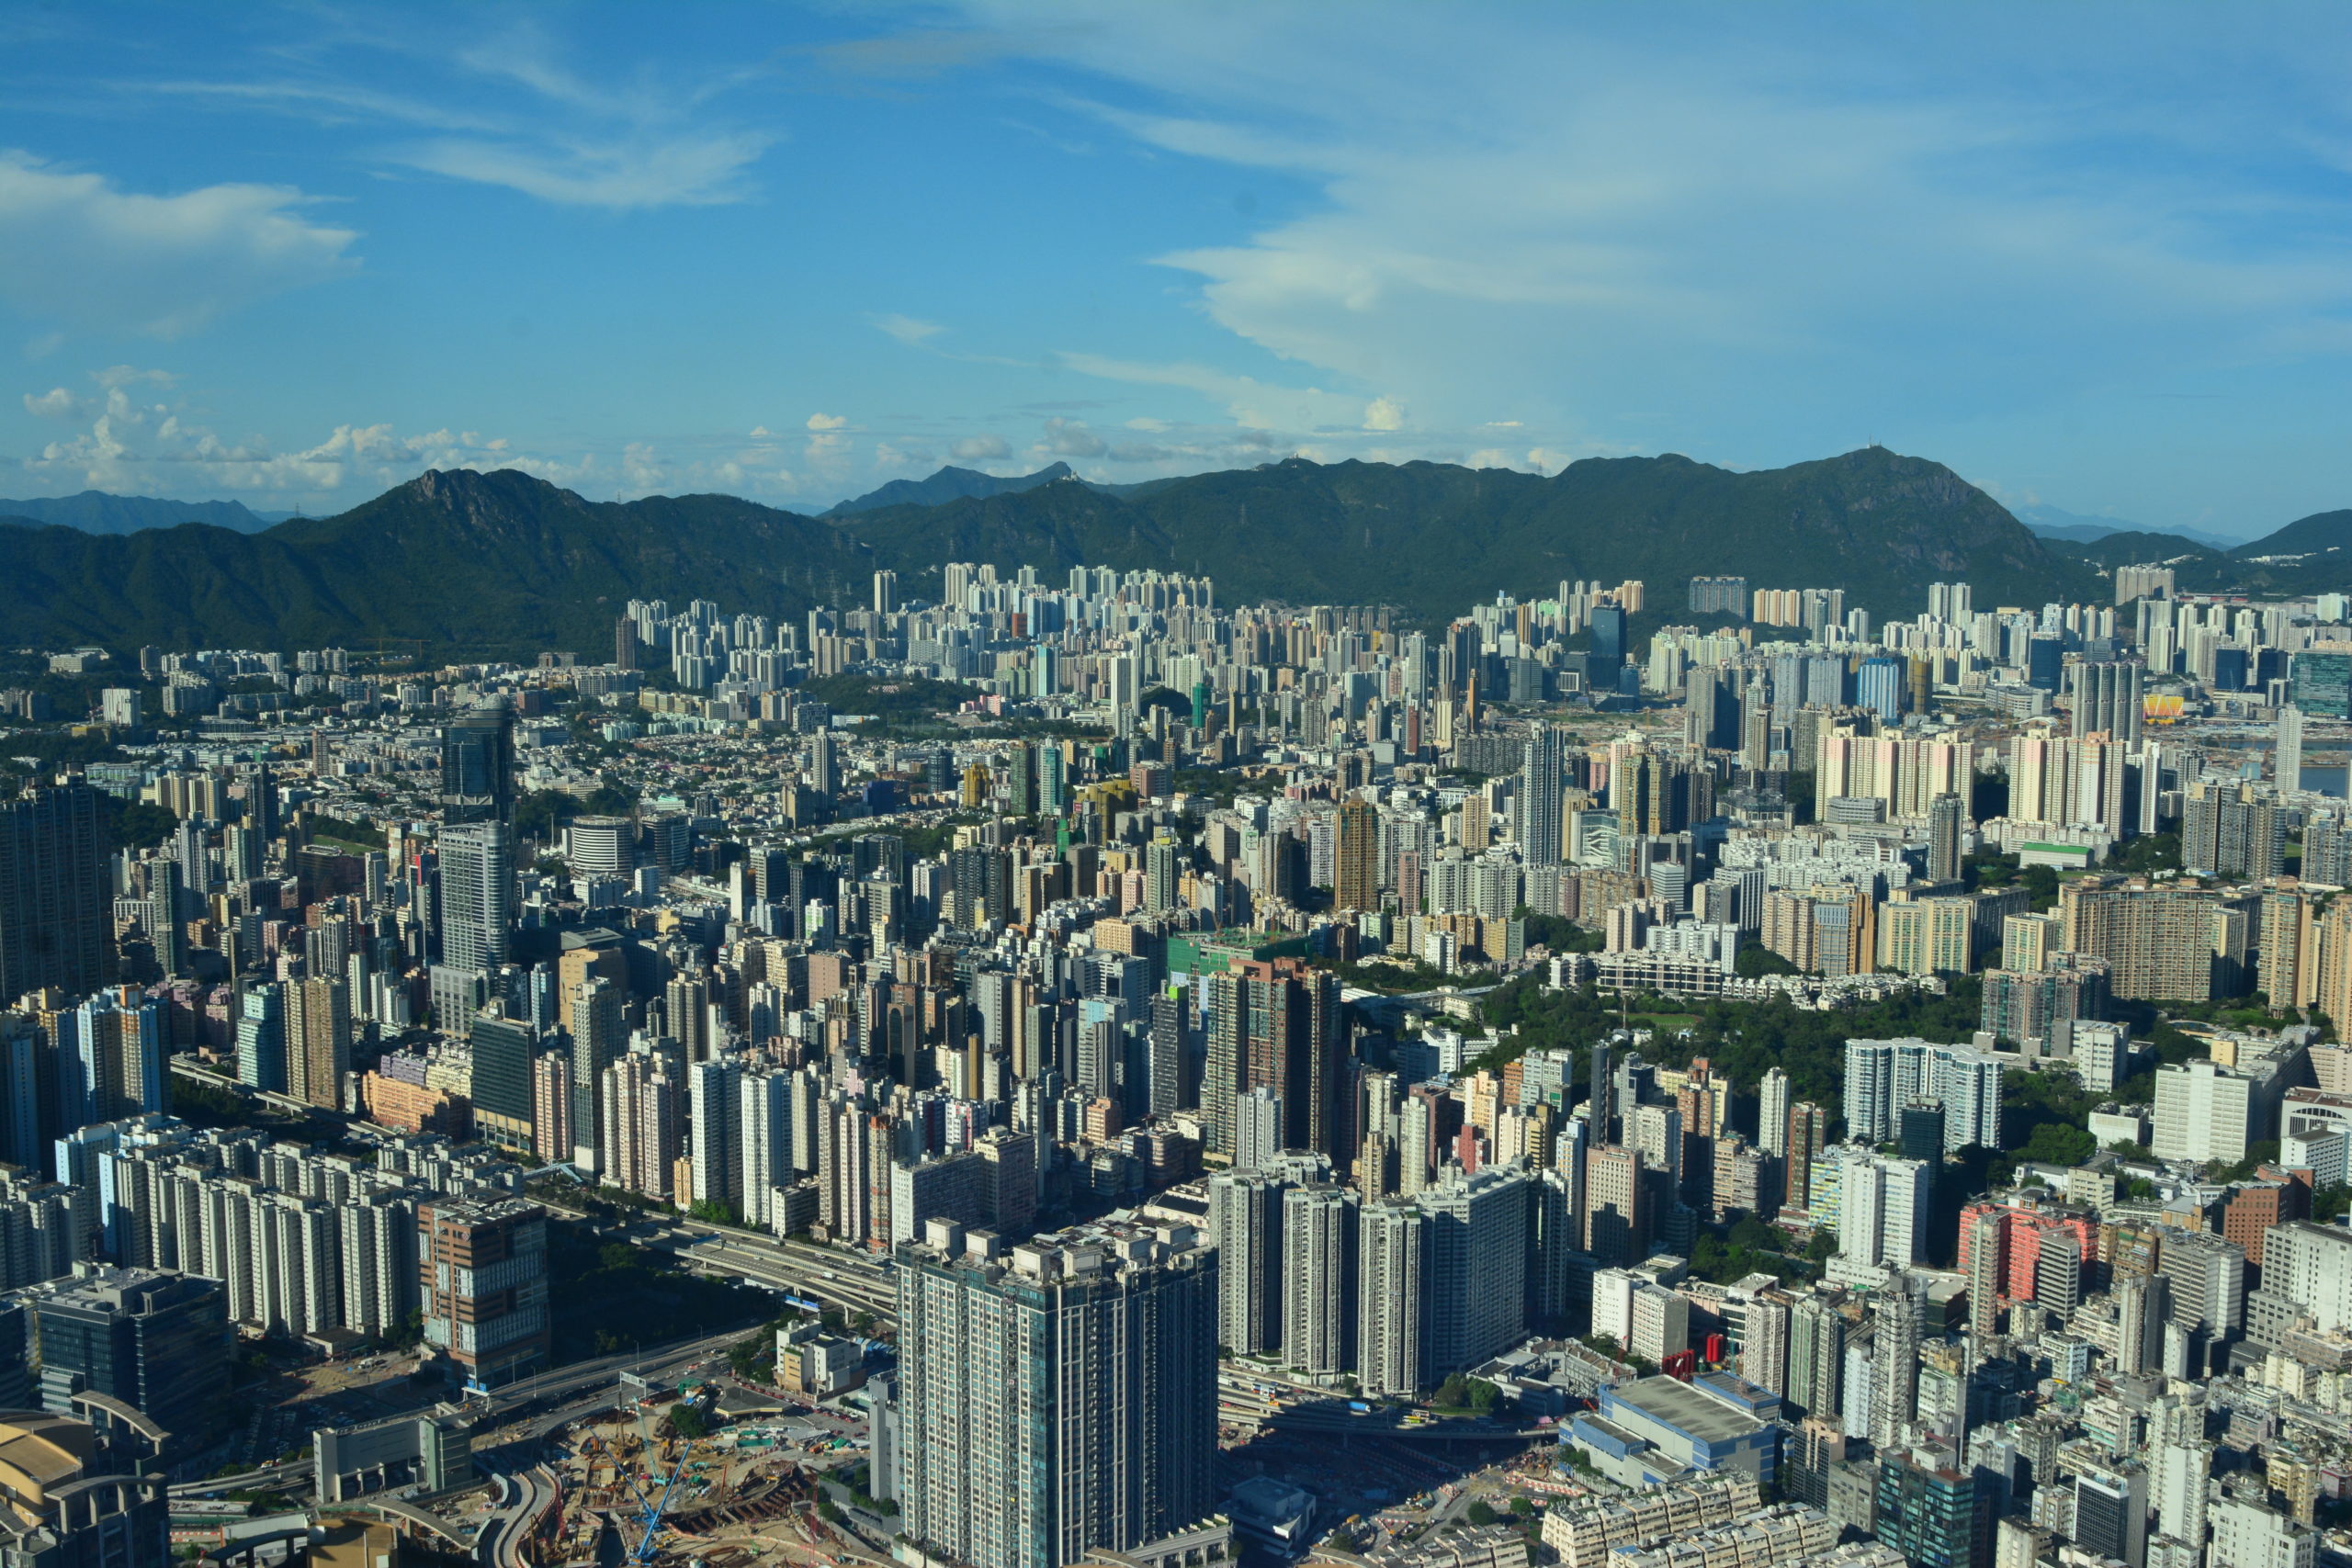 The fabulous view of Kowloon urban area and mountains